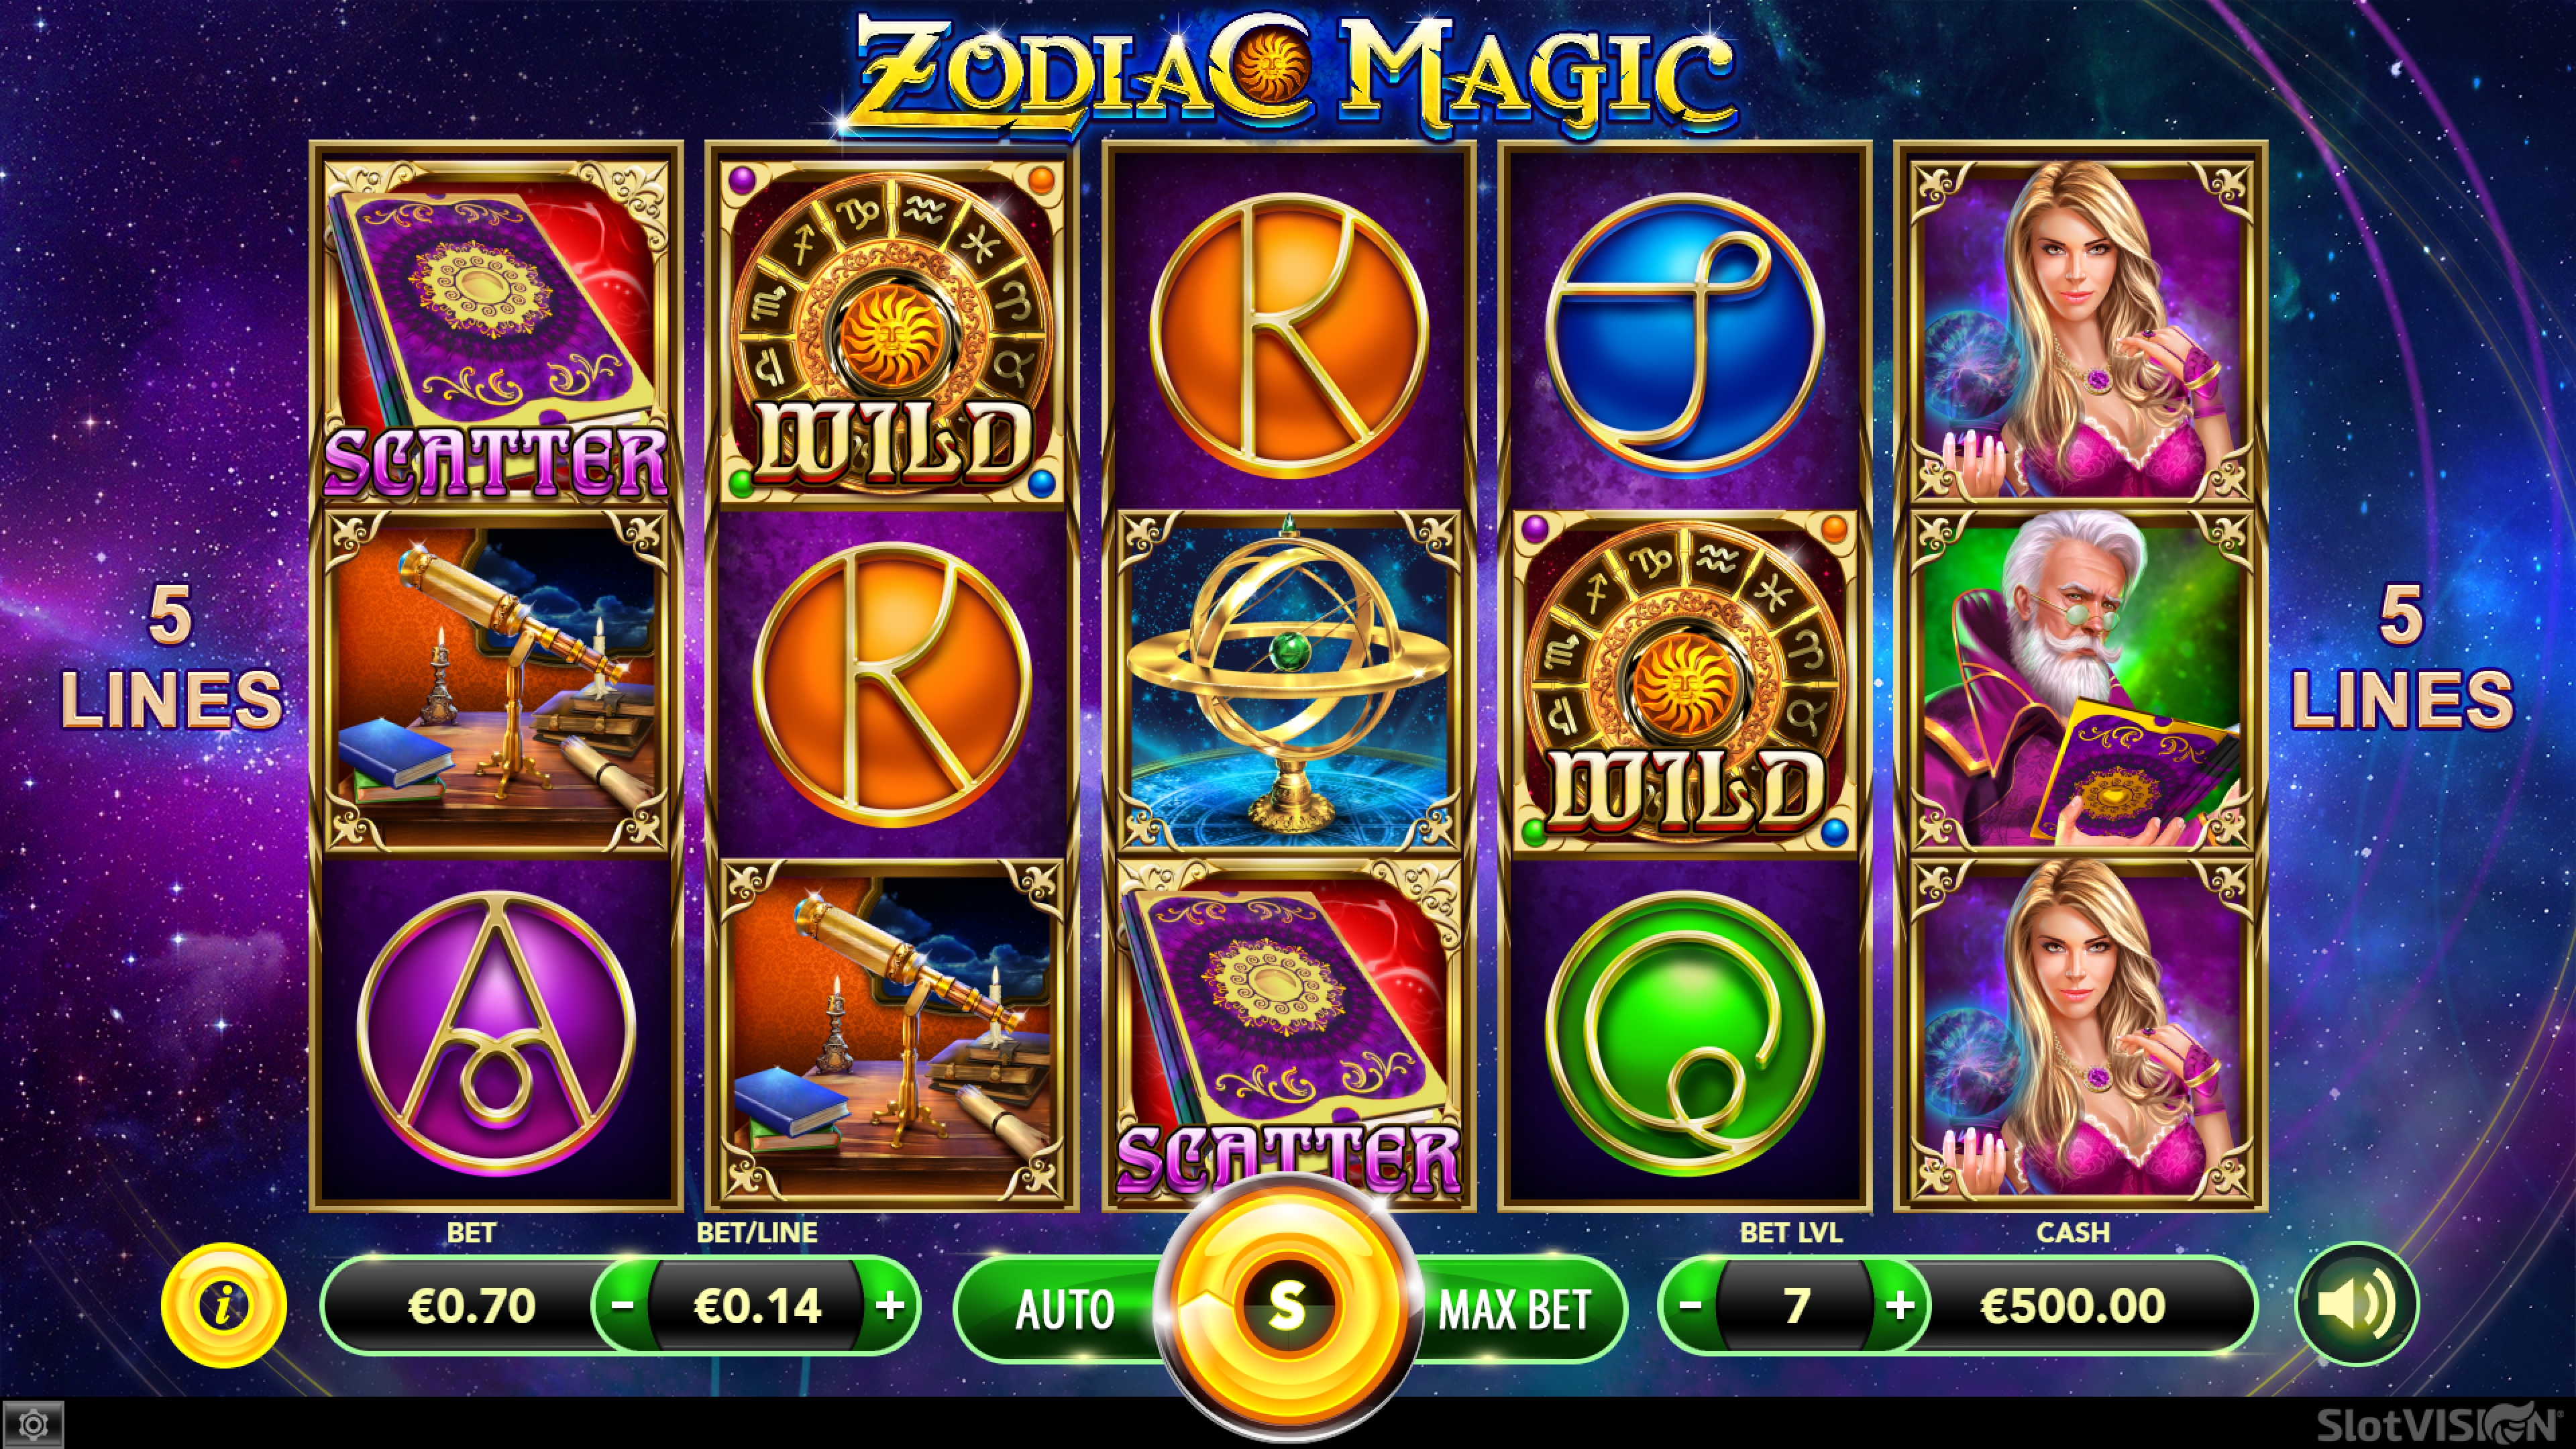 The Zodiac Magic Online Slot Demo Game by SlotVision